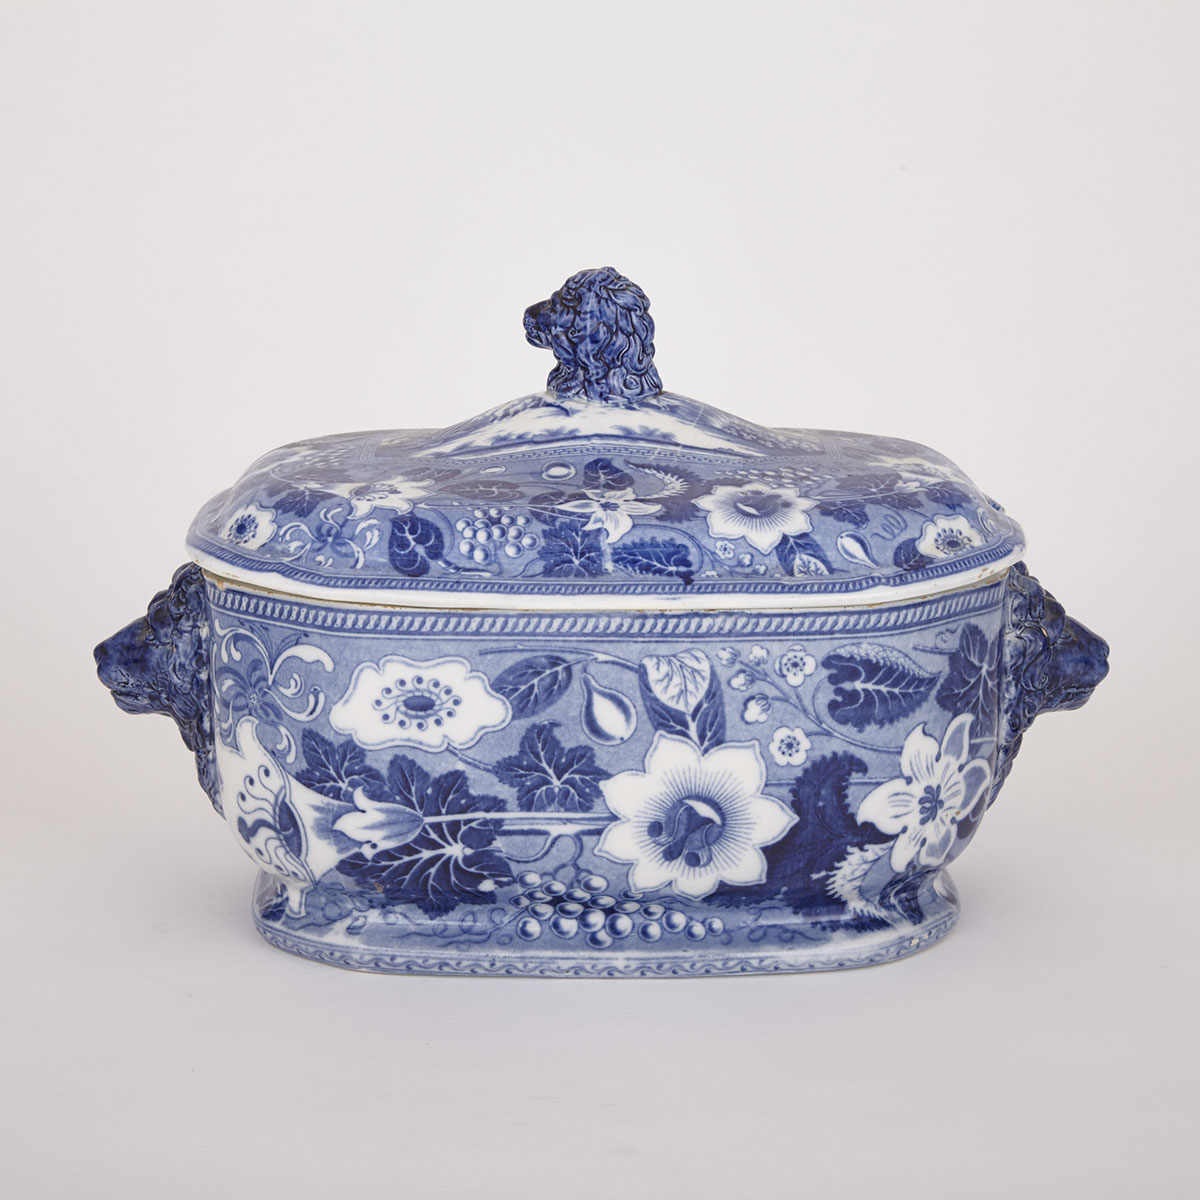 Staffordshire Blue Printed Octagonal Soup Tureen and Cover, possibly Minton, c.1820-25